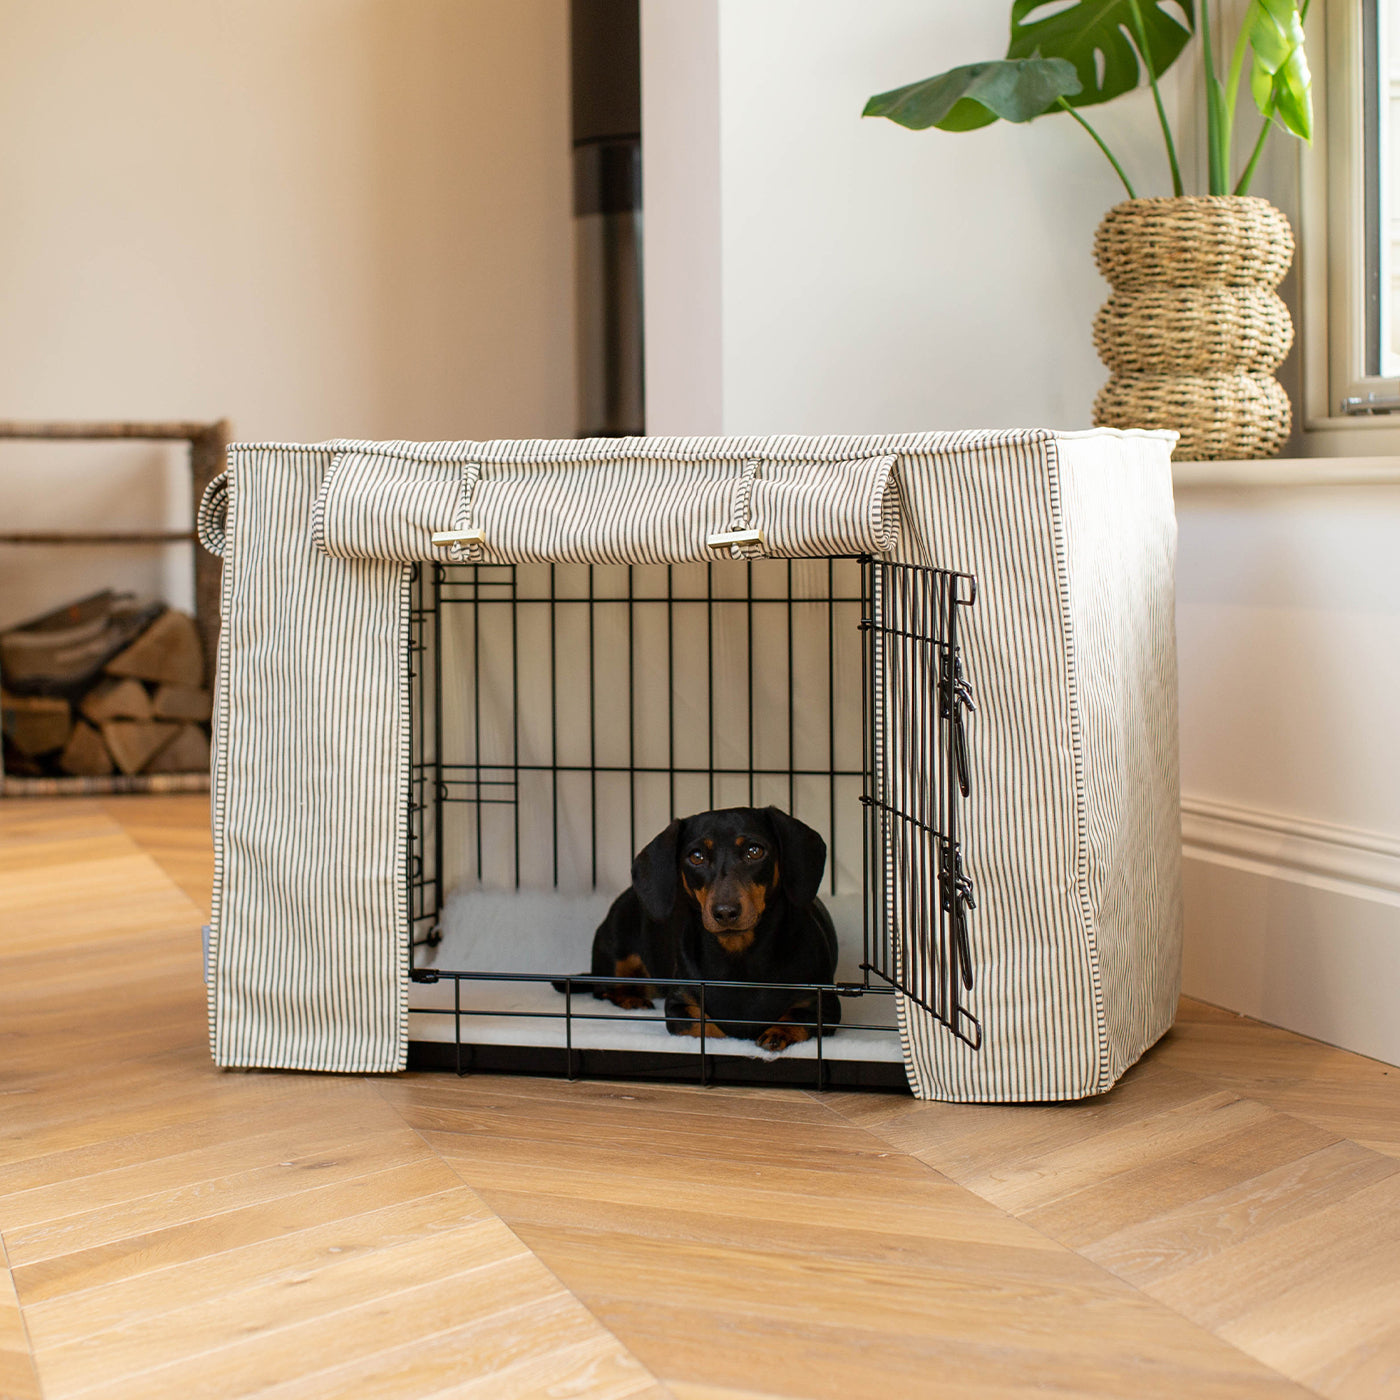 Luxury Dog Crate Cover, Regency Stripe Crate Cover The Perfect Dog Crate Accessory, Available To Personalise Now at Lords & Labradors